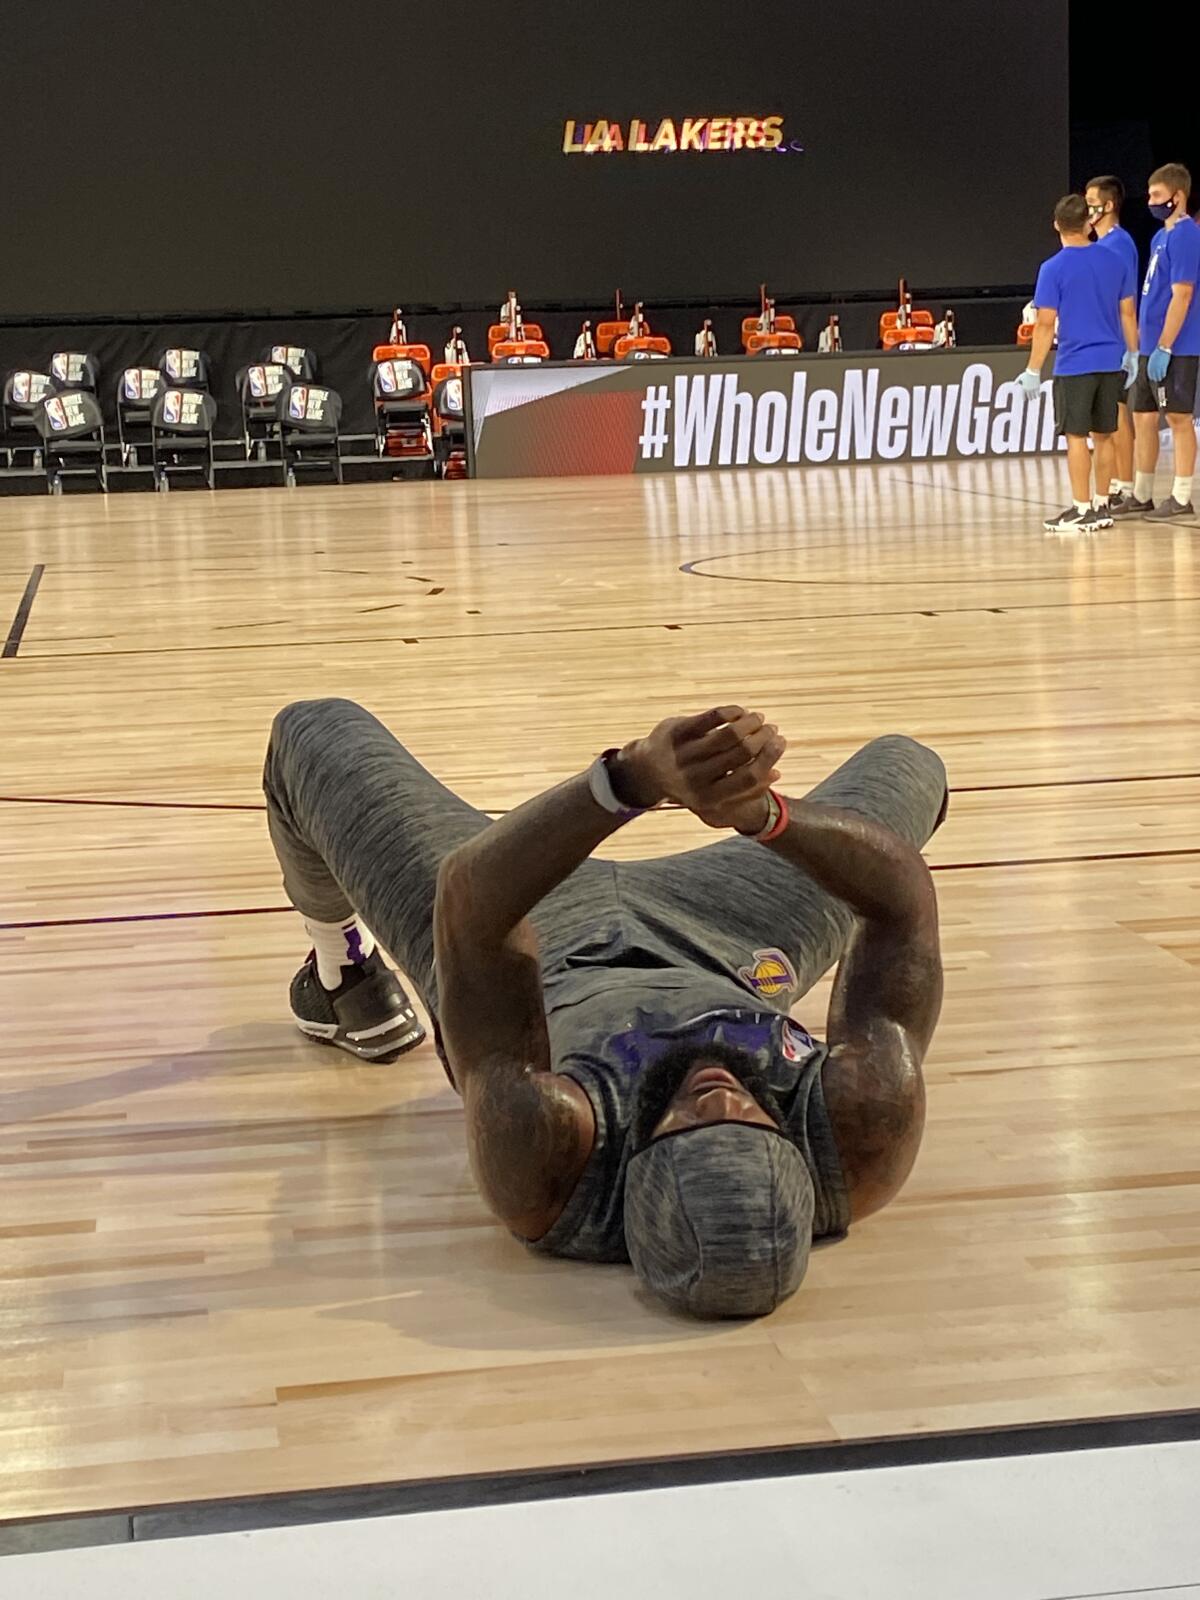 Lakers star LeBron James, while wearing his MagicBand, stretches before a game in the NBA bubble in Orlando.